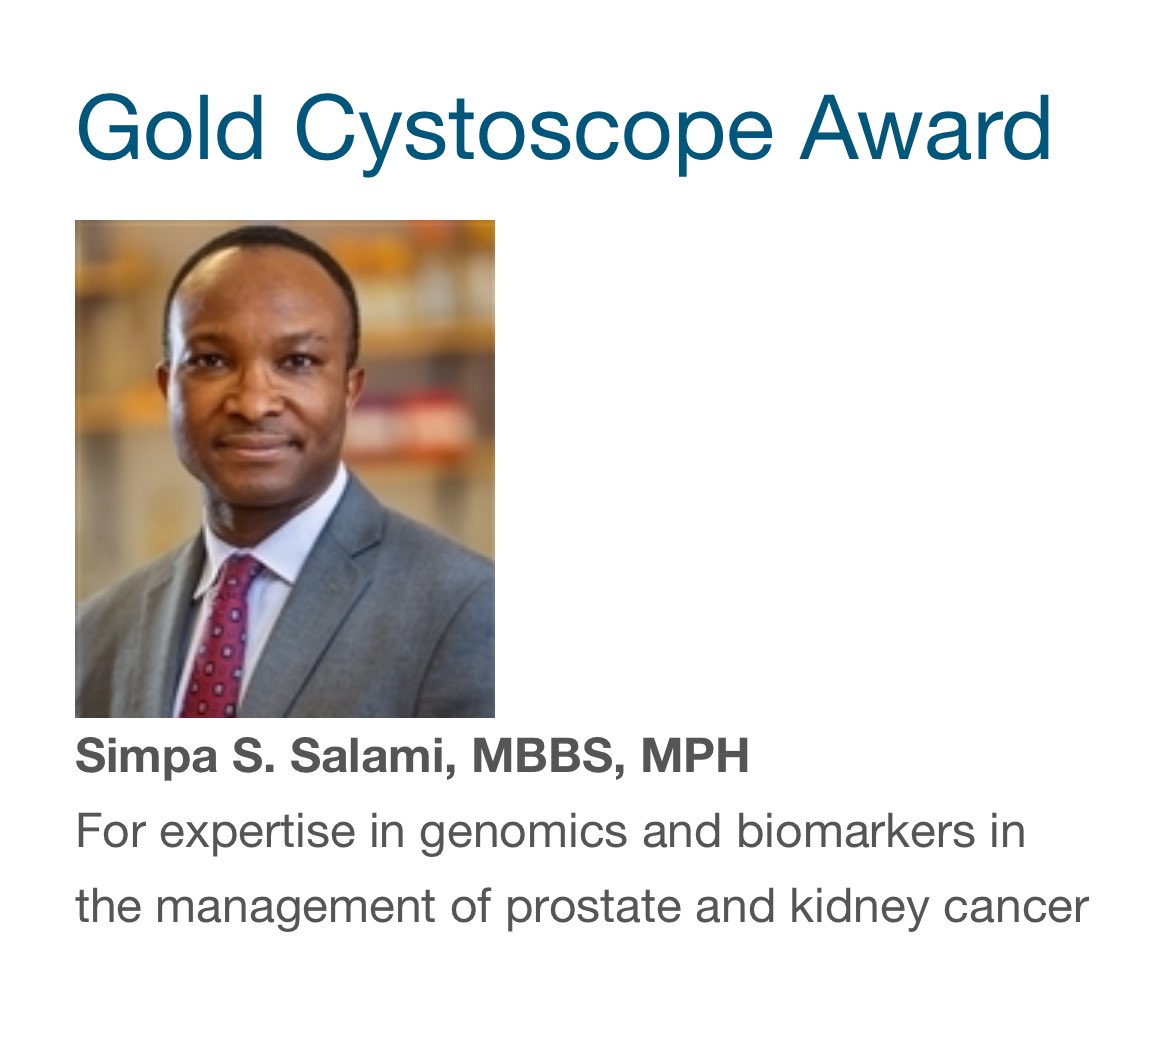 Please join us in congratulating our YUO Chair @samsimsal! Dr. Salami is the winner of the @AmerUrological’s prestigious Gold Cystoscope Award for his outstanding contributions to the science of genomics for the early detection and treatment of urologic cancers 👏👏👏